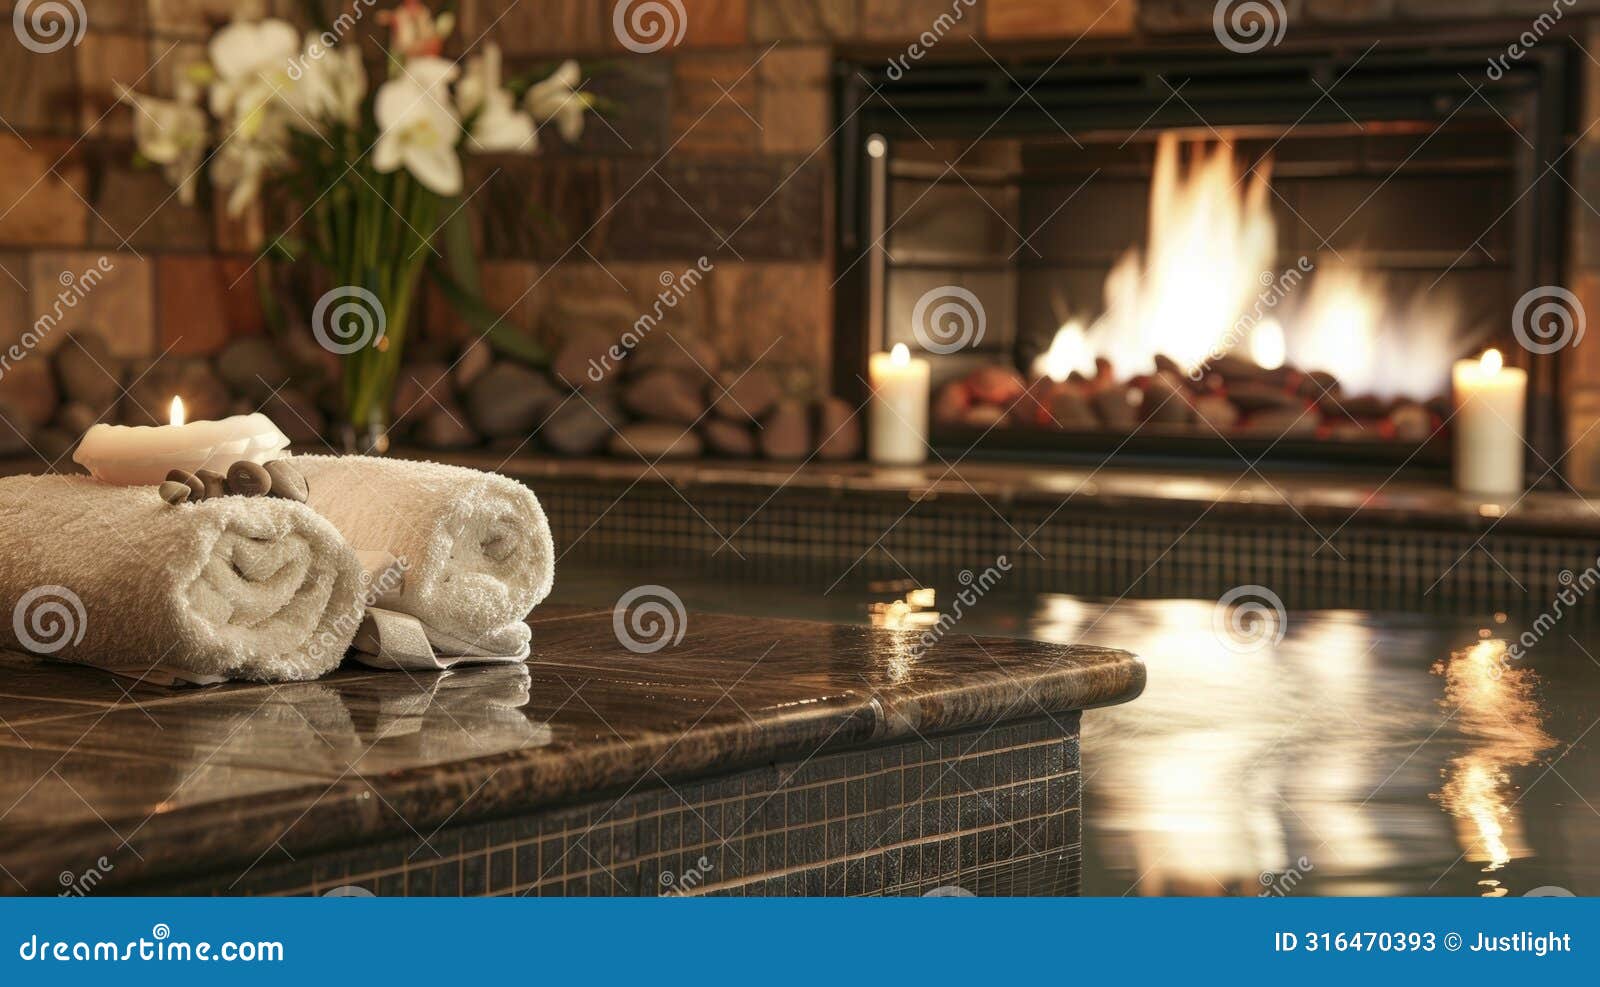 guests can bask in the warmth of the fireplace while enjoying a relaxing foot soak in the spas cozy foot bath area. 2d